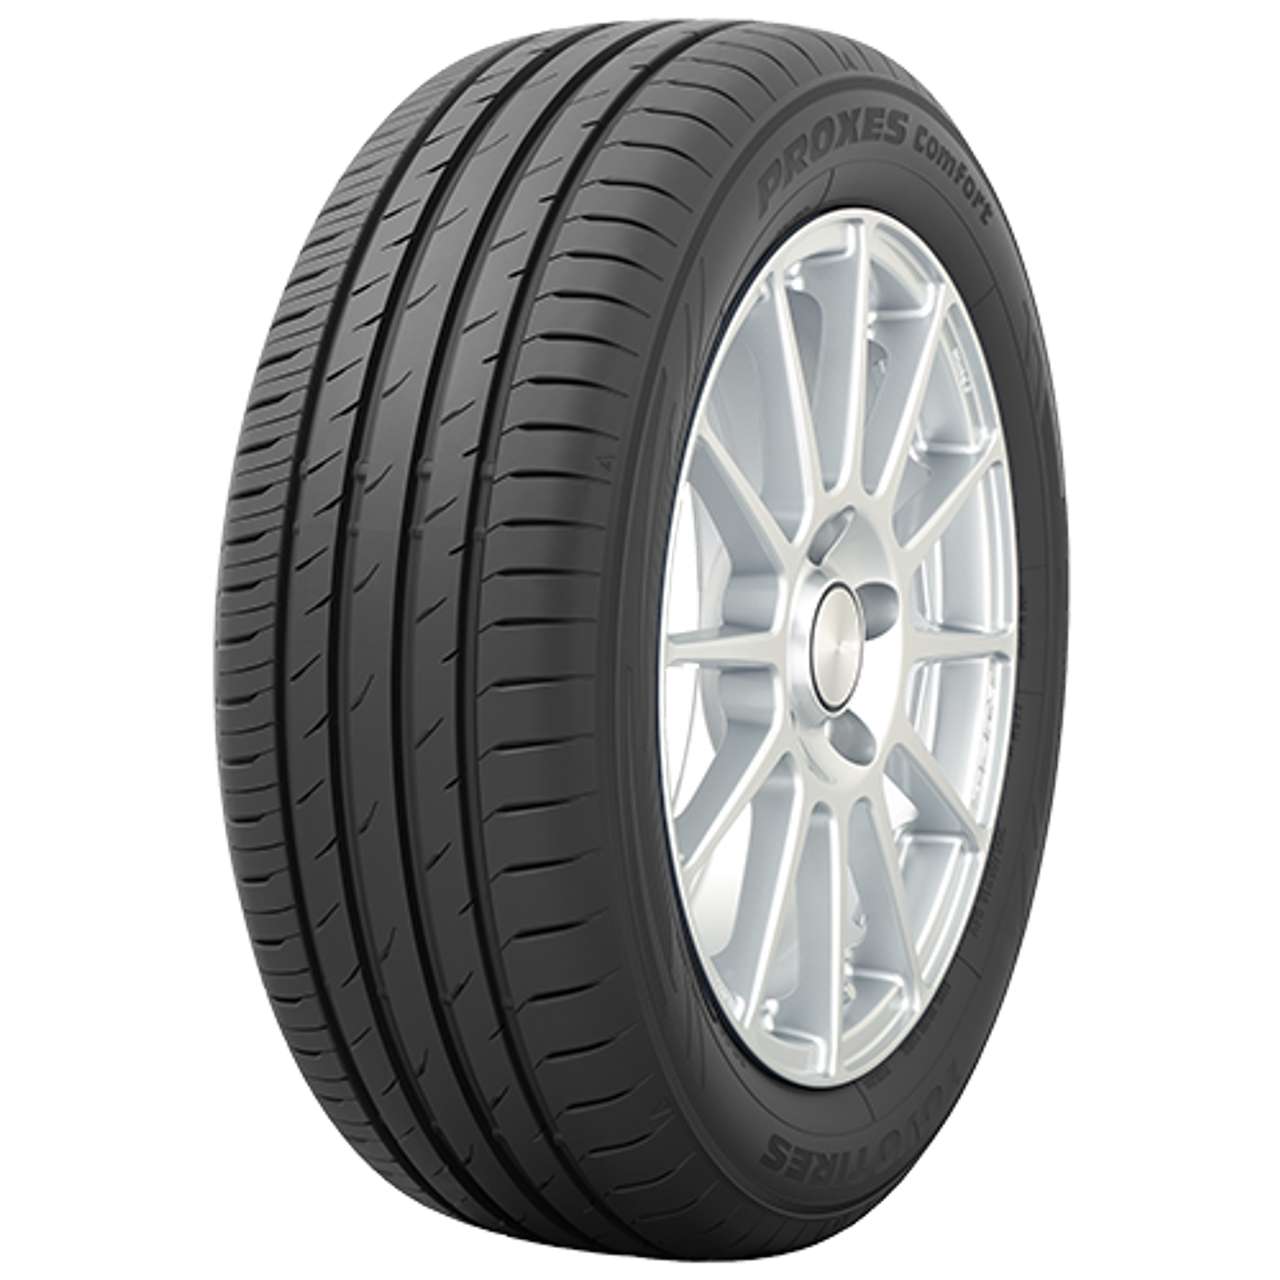 TOYO PROXES COMFORT 185/60R15 88H BSW XL